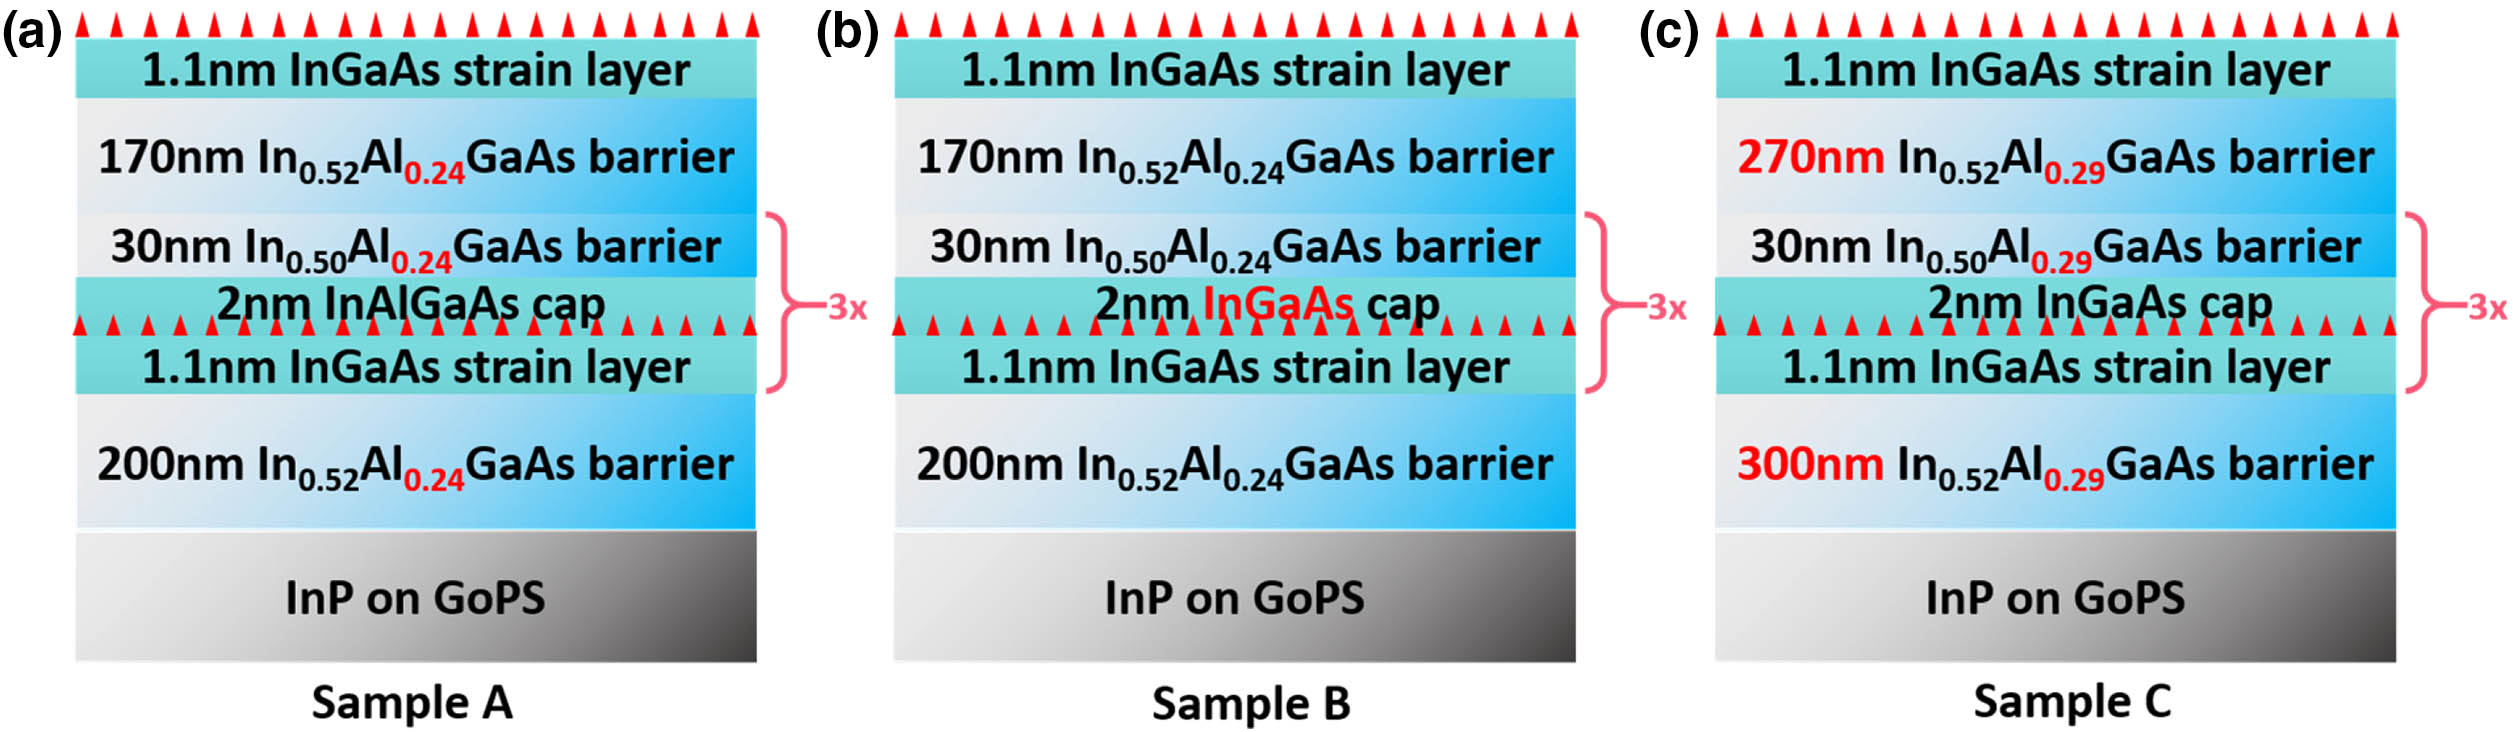 Schematic diagram of QDashes grown on InP/GoPS with different structures. (a) Sample A: Al composition of InAlGaAs is changed from 0.29 to 0.24. (b) Sample B: low temperature cap layer is changed from InAlGaAs to InGaAs based on Sample A. (c) Sample C: Al composition of InAlGaAs is changed back to 0.29, and the thickness of InAlGaAs is increased from 200 nm to 300 nm based on Sample B.